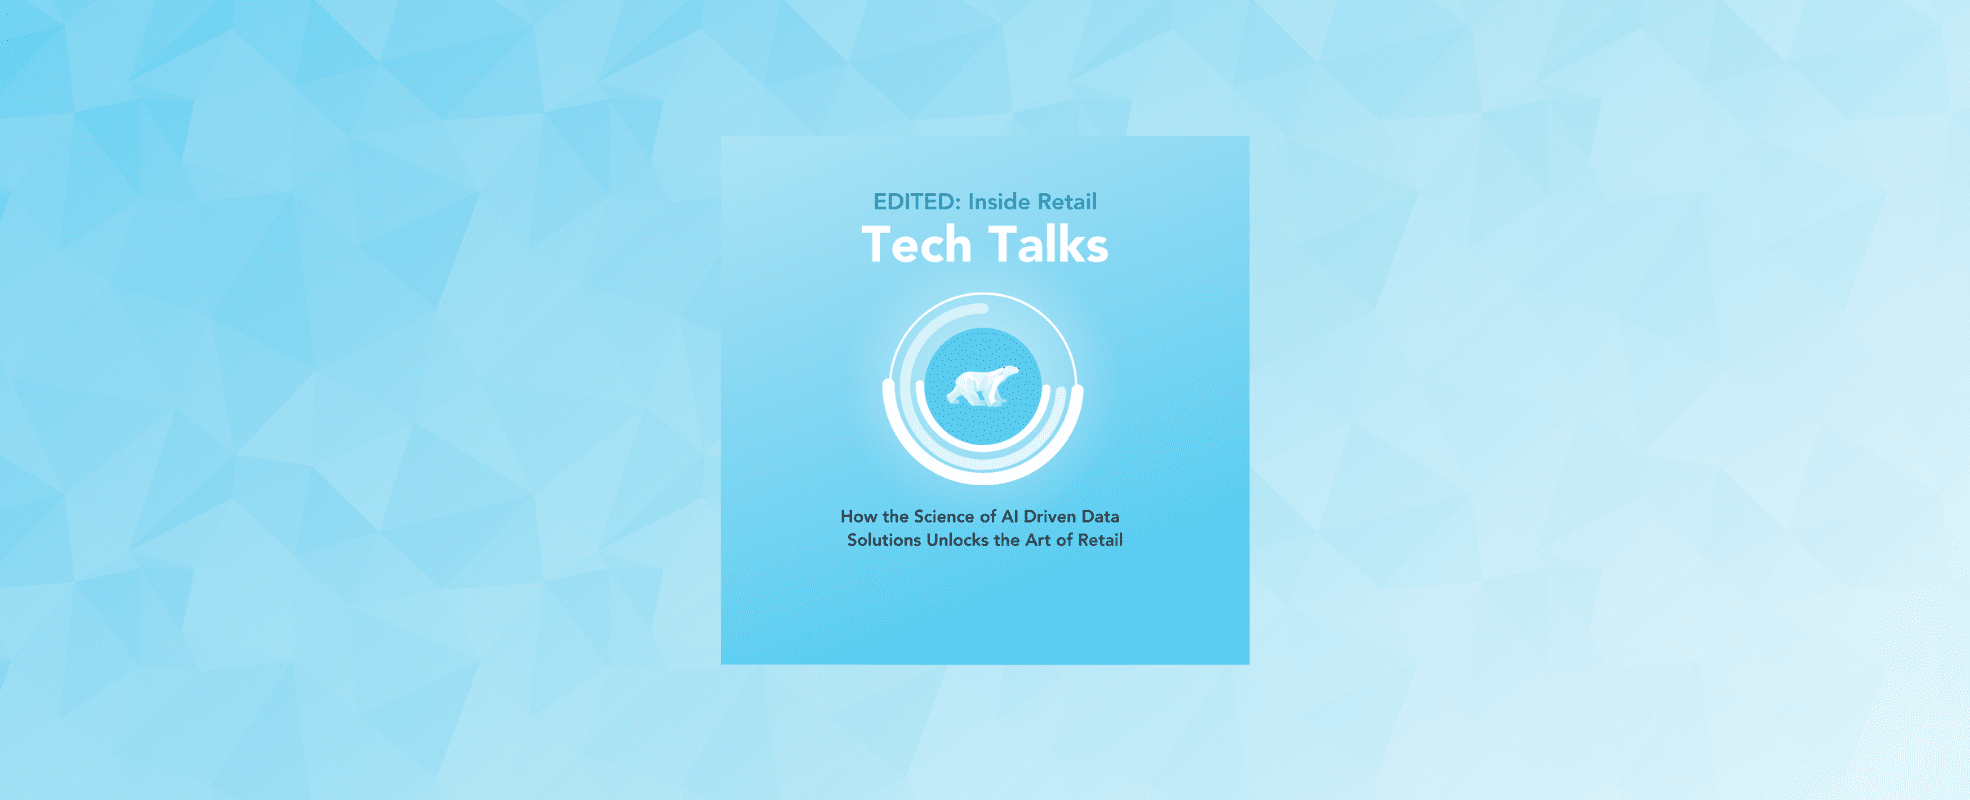 Tech Talks - Retail Automation For Better Results | EDITED